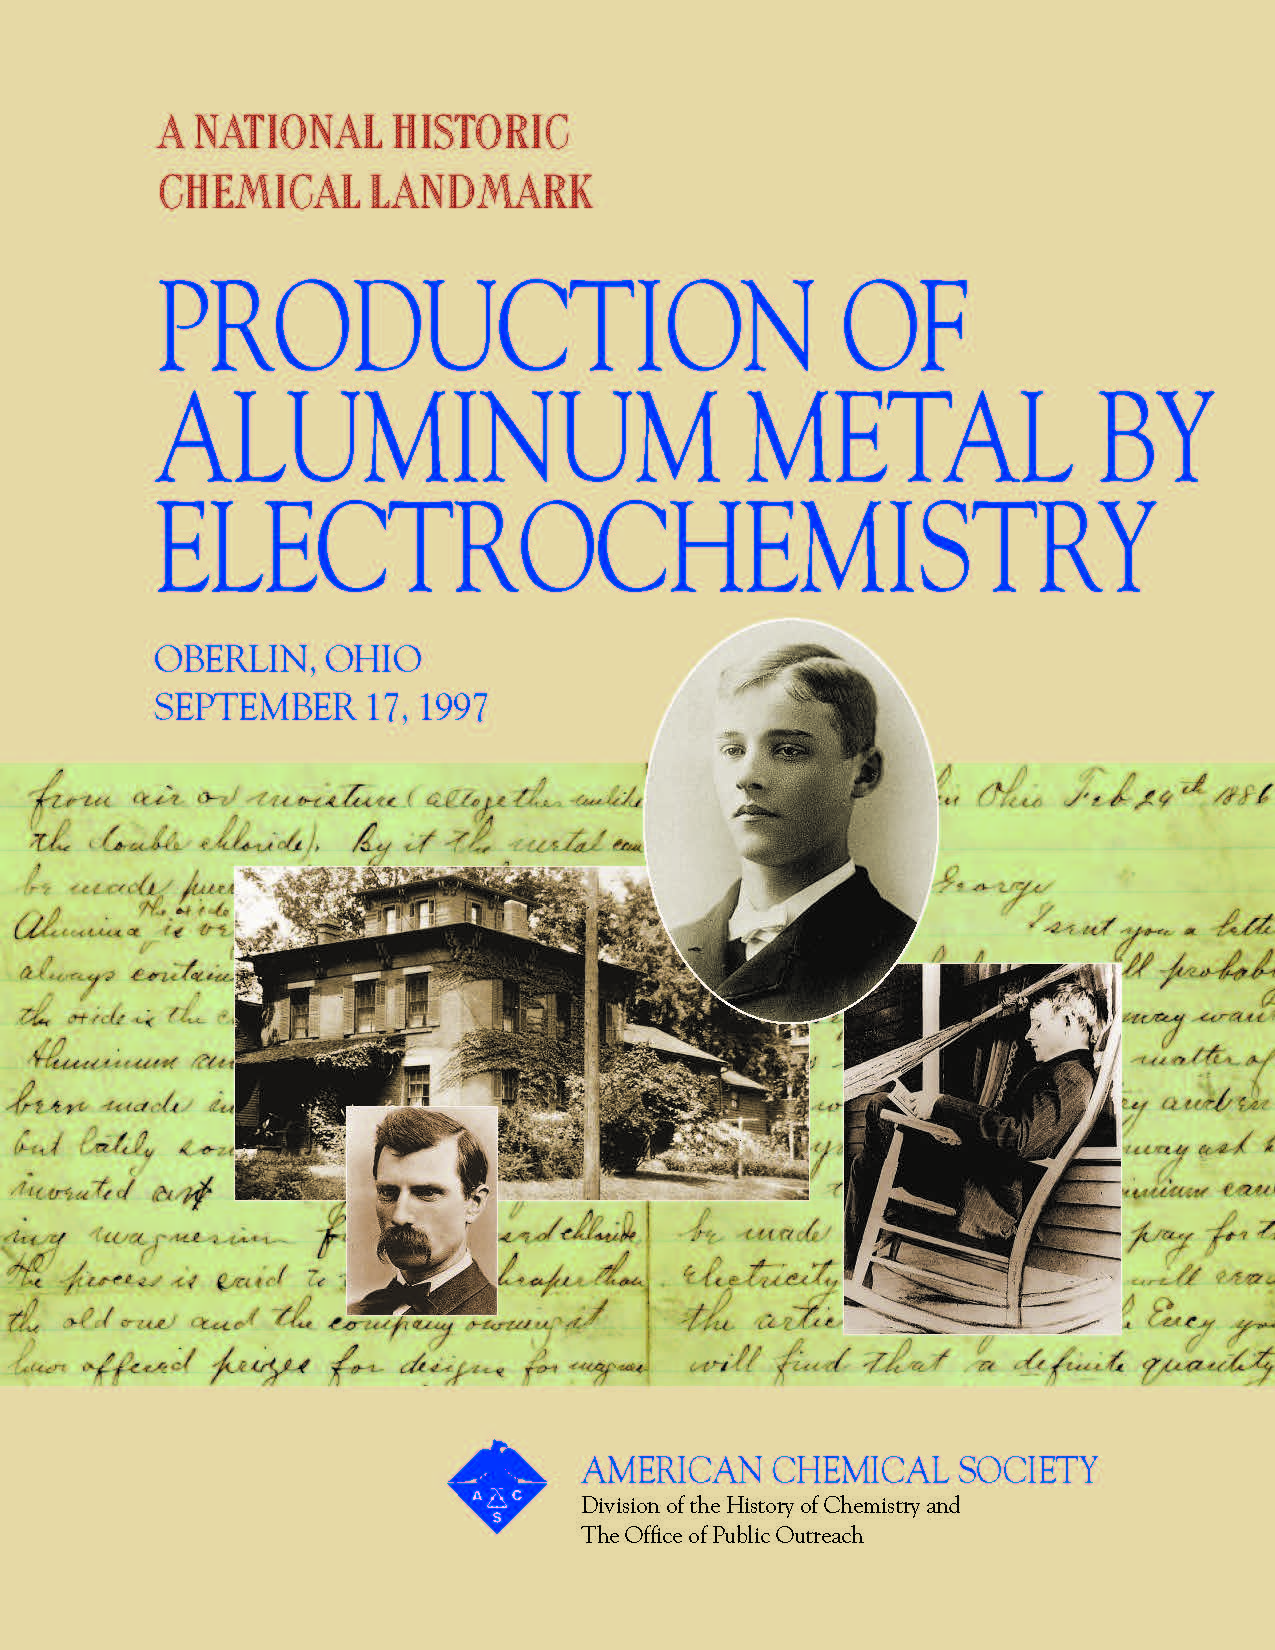 “Production of Aluminum Metal by Electrochemistry” commemorative booklet 